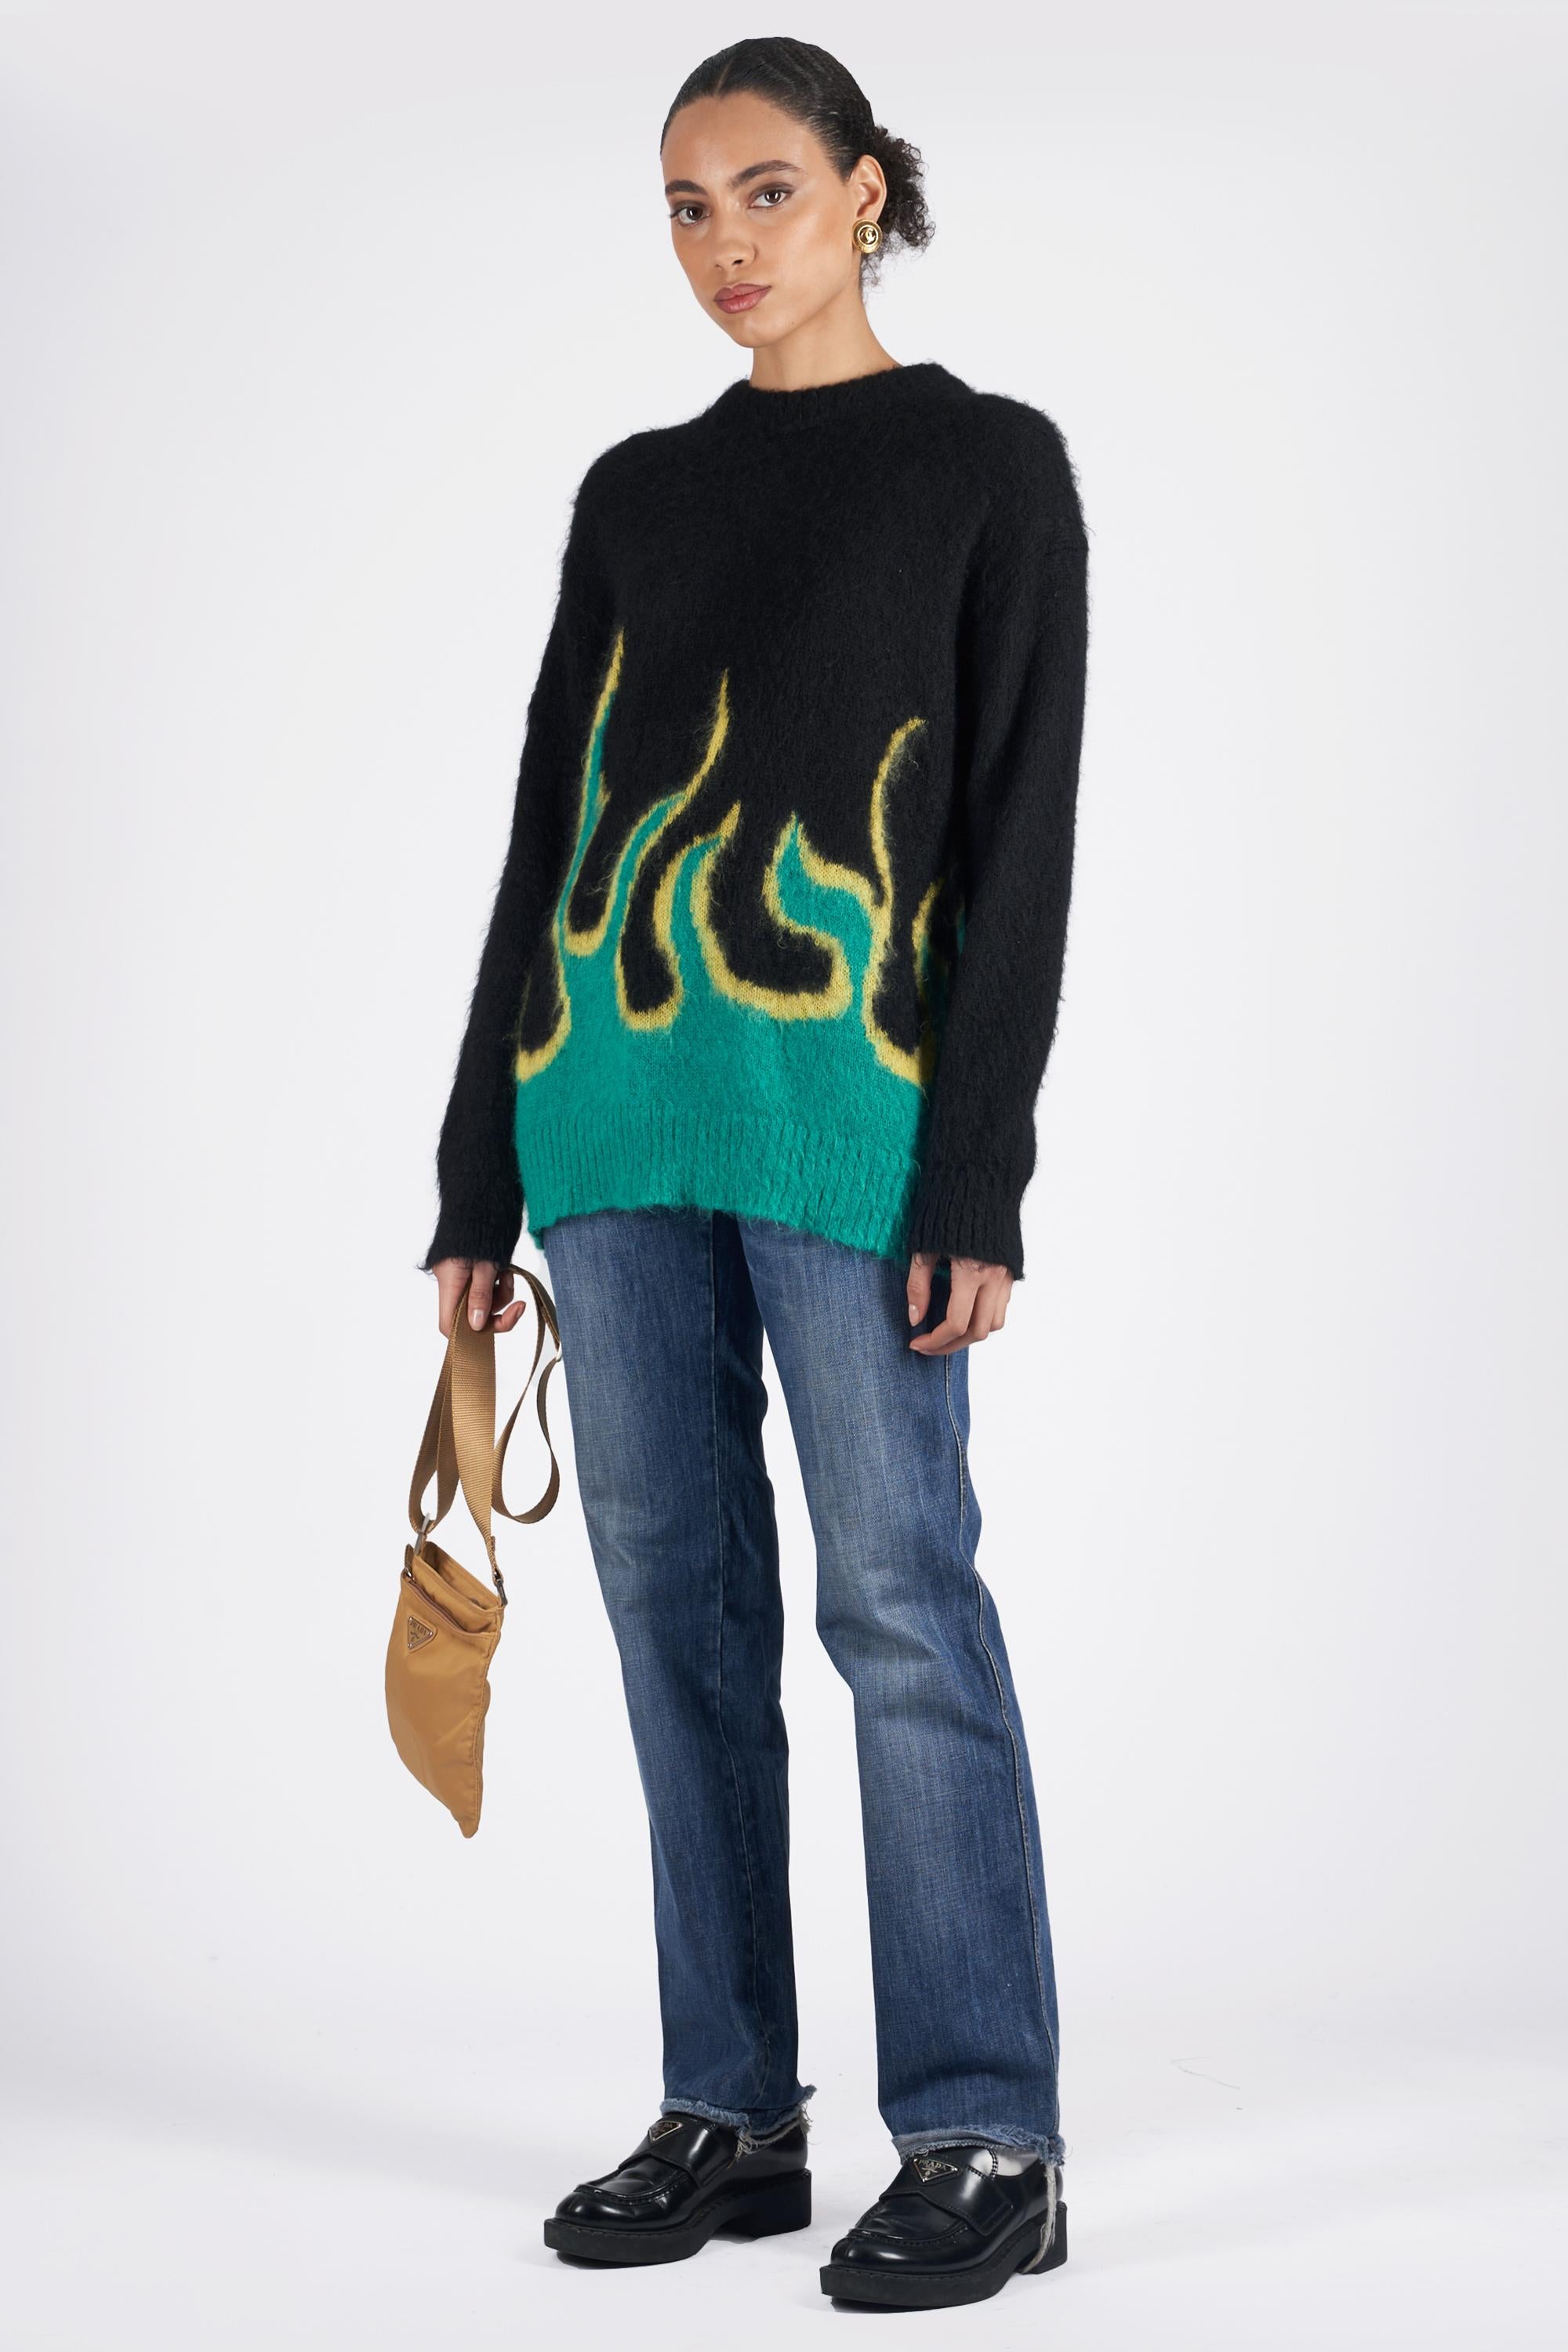 Prada 2018 Flame Knitted Jumper In Excellent Condition For Sale In London, GB